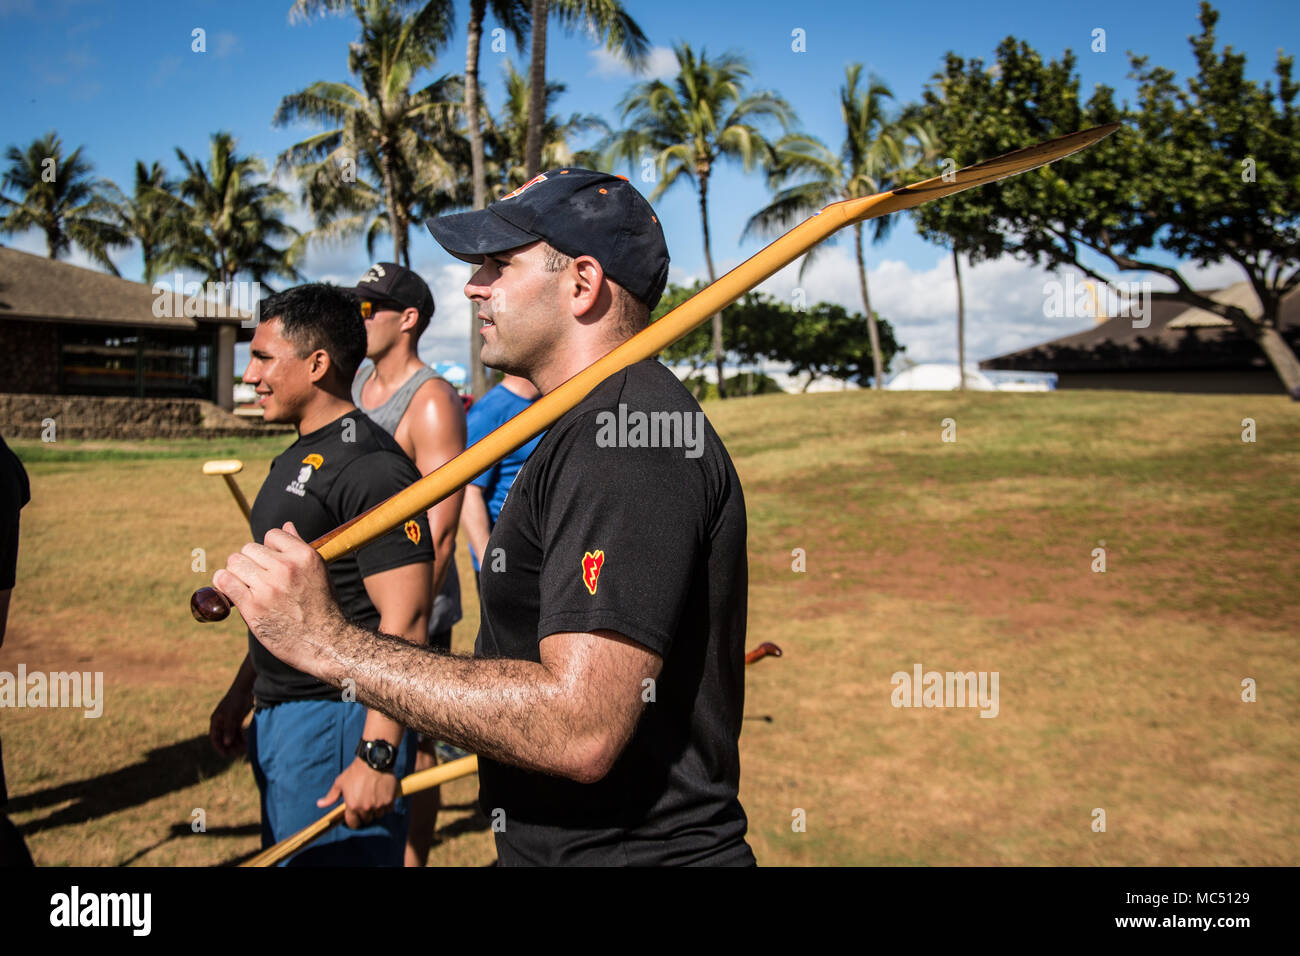 U.S. Army 1st. Lt. Pete Falcone, assigned to 1st Battalion, 27th Infantry Regiment, 2nd Infantry Brigade Combat Team, 25th Infantry Division listens to paddle instruction before the start of the team-building exercise in Keehi Lagoon, Honolulu, Hi., Jan. 30, 2018. In an effort to strengthen international relationships, United States Army Pacific hosted personnel from the British Army to participate in a team building exercise facilitating outrigger canoeing. (U.S. Army photo by 1st. Lt. Ryan DeBooy) Stock Photo